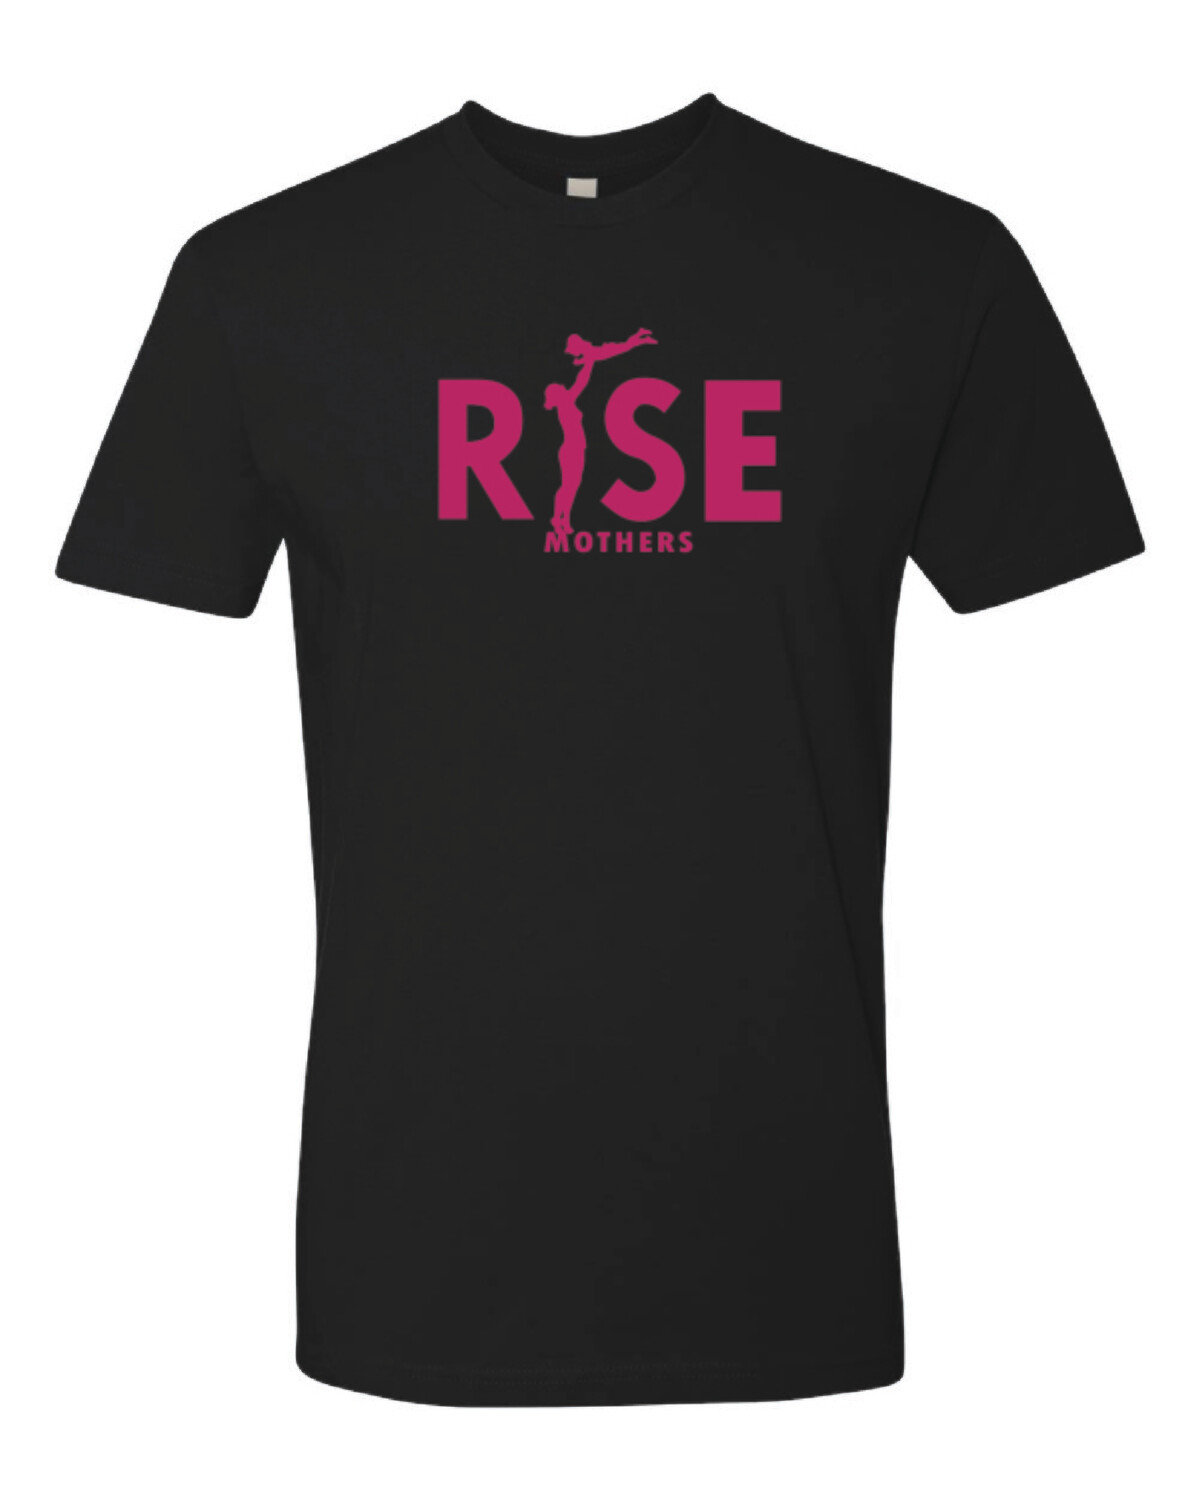 RISE Mothers - The Well - Unisex - T-Shirt